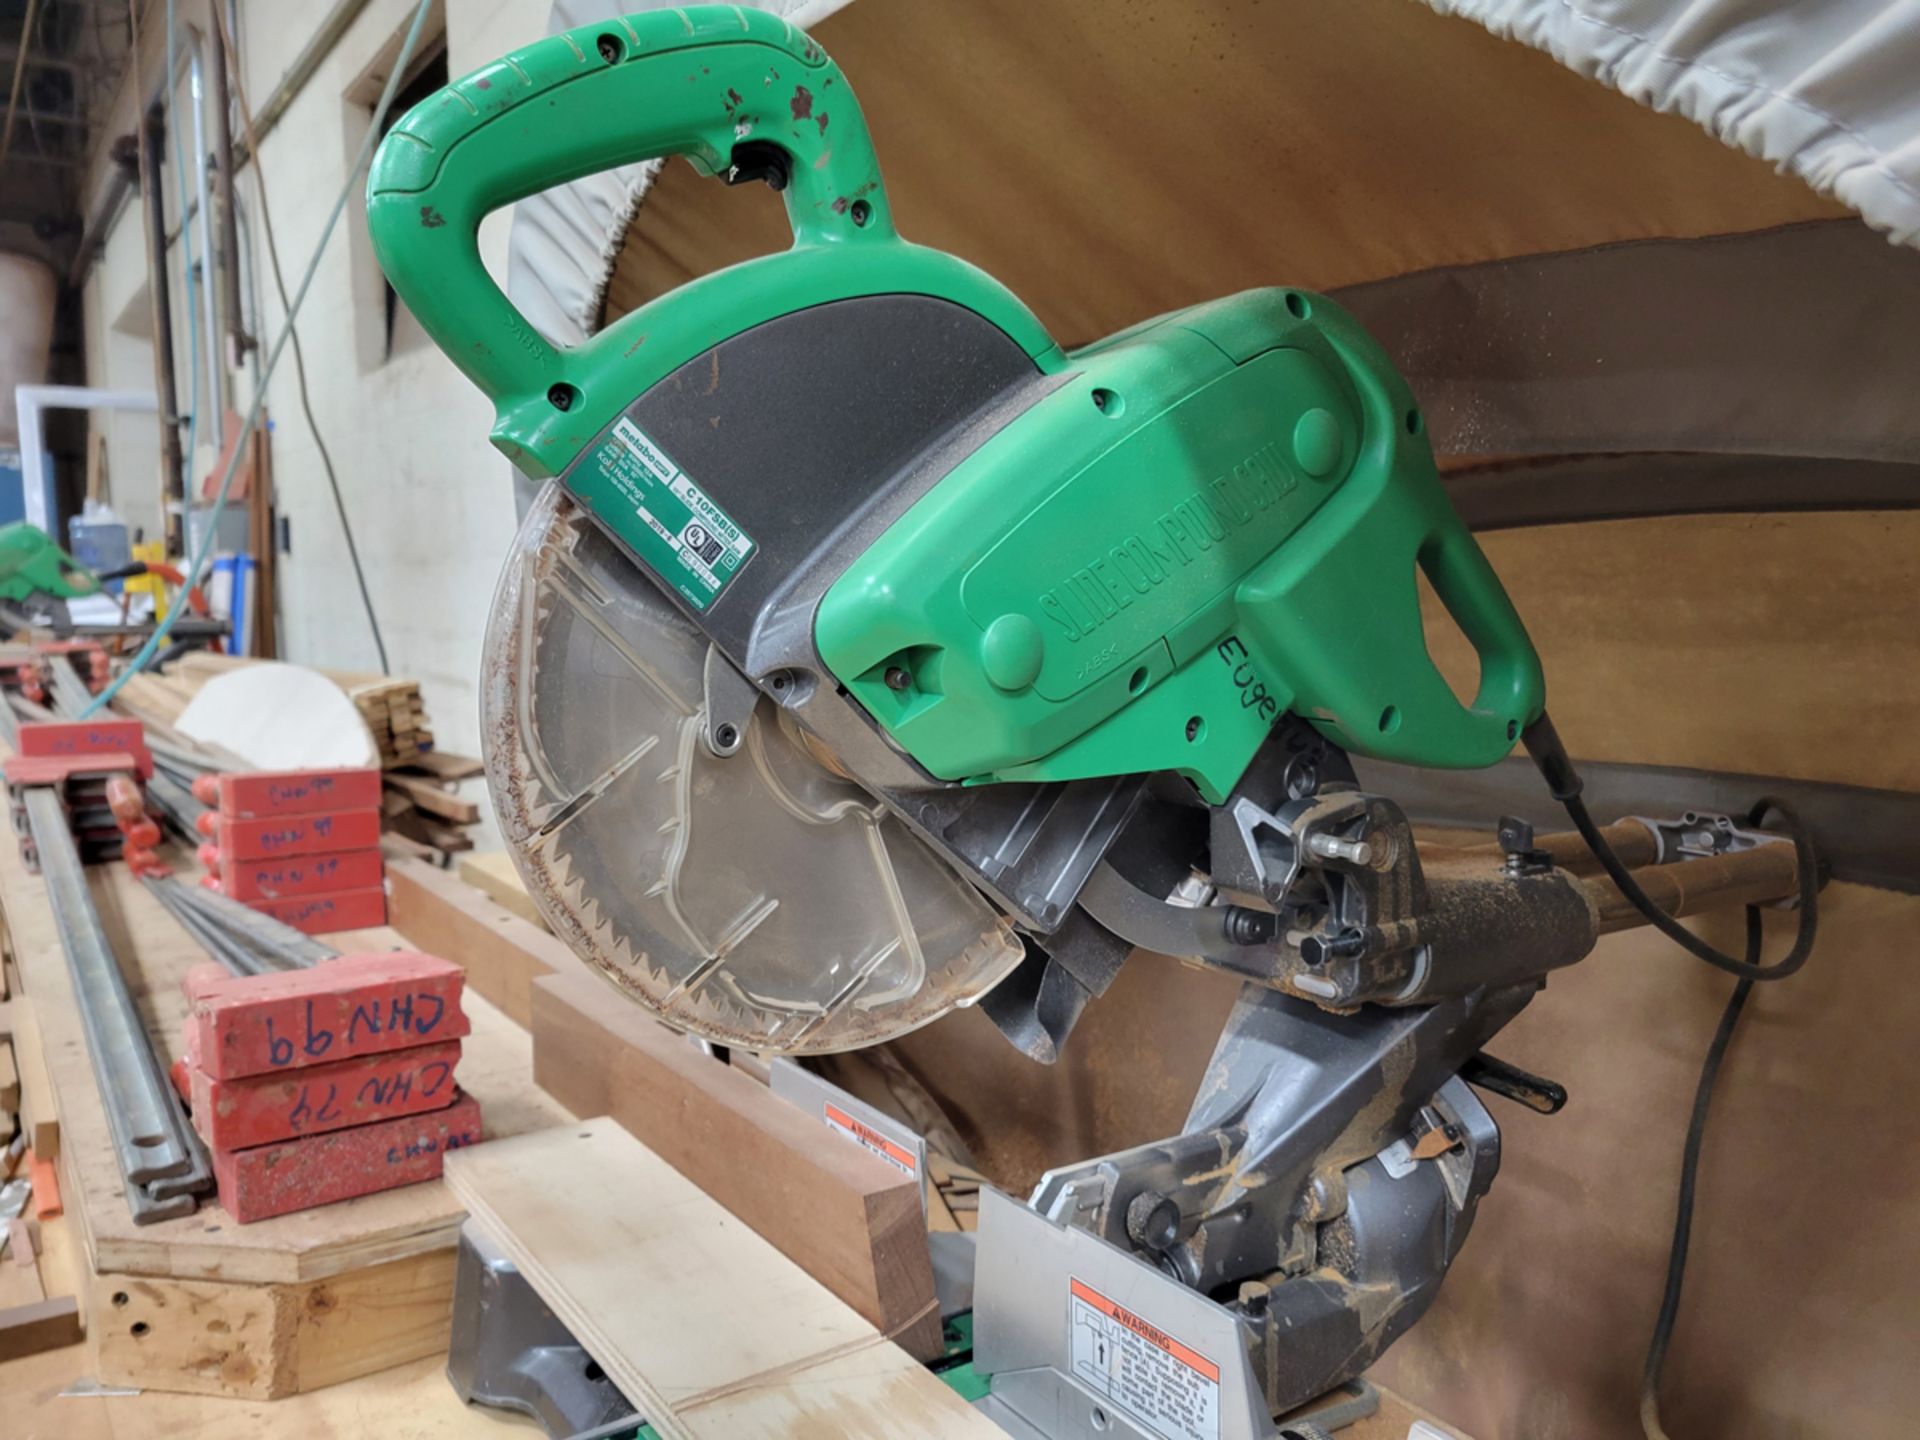 Metabo Model: C10FSB 10" Slide Compound Miter Saw w/ Rousseau 5000 Dust Catch - Image 4 of 6